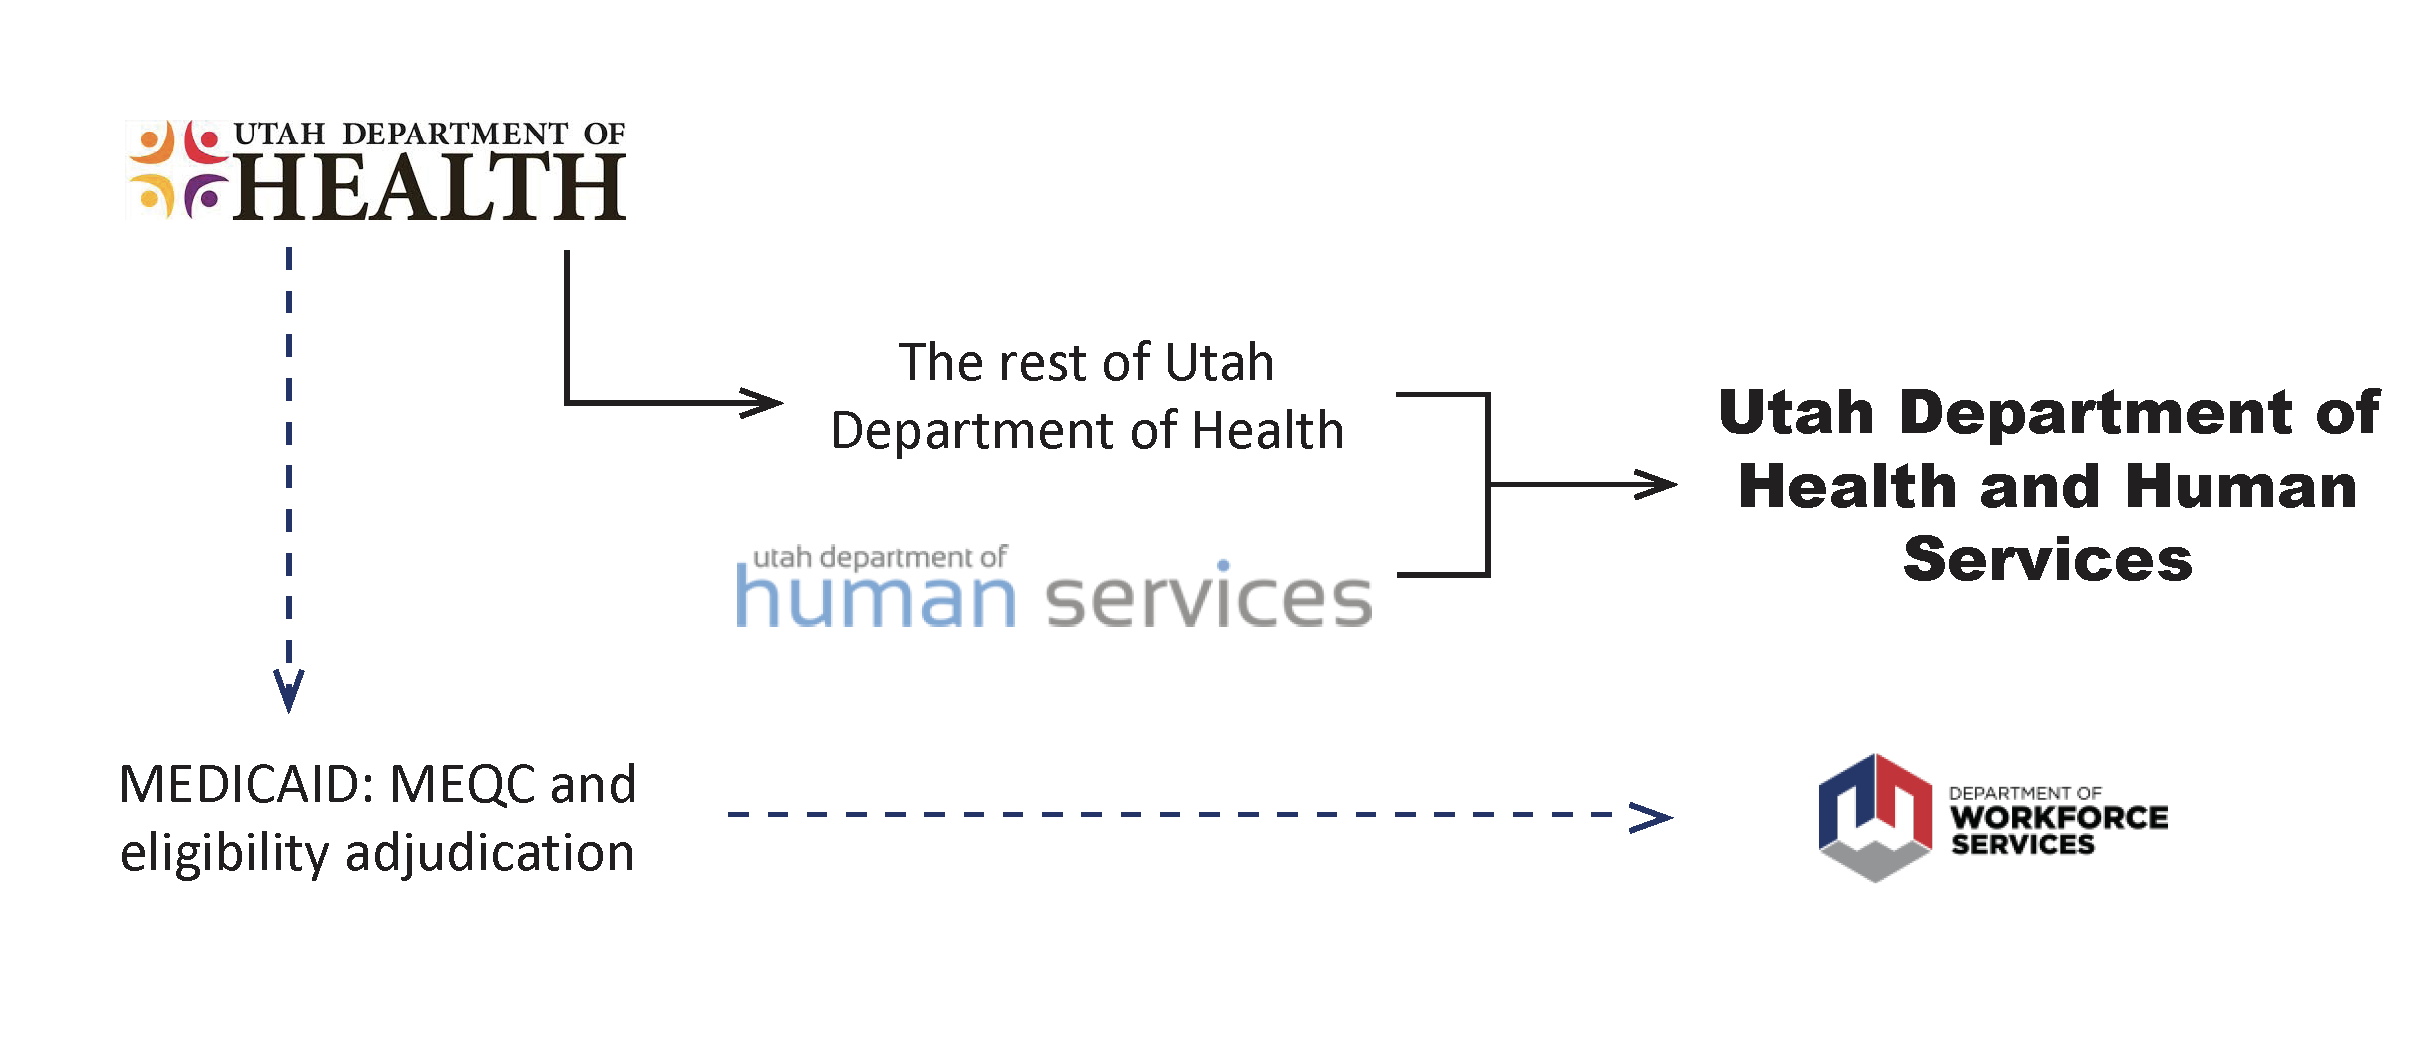 Flowchart showing how DOH has been merged into Utah's DHHS